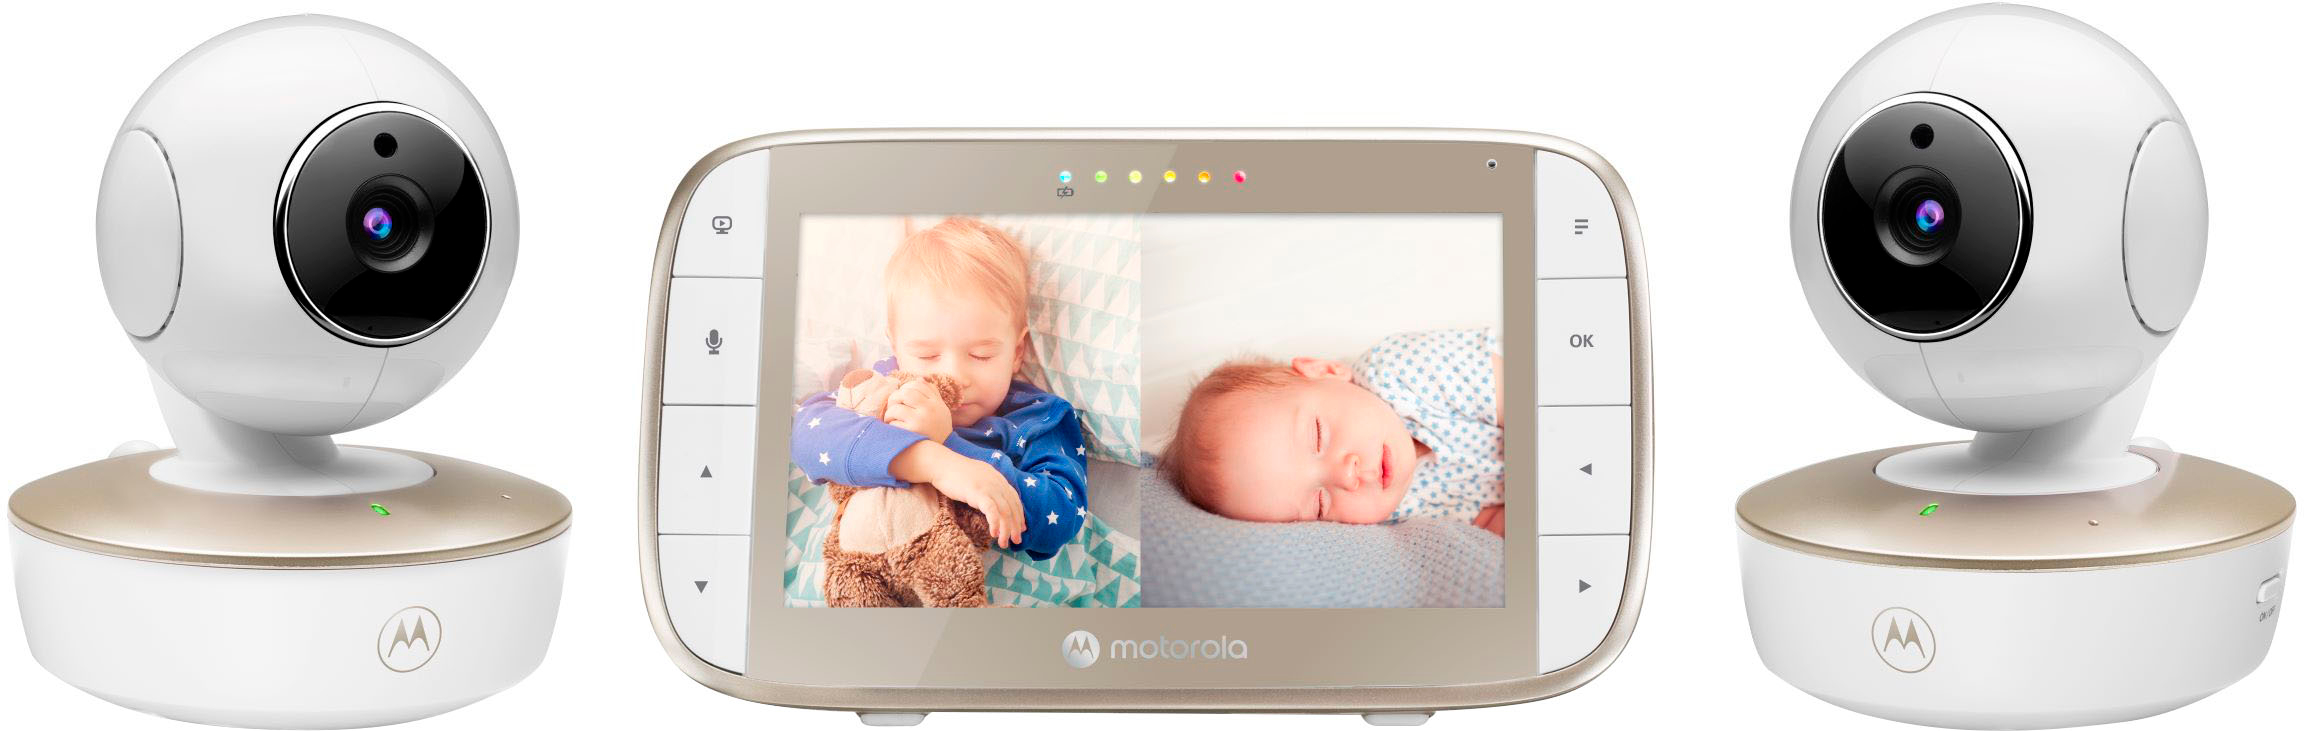 Motorola PIP1510 Connect video baby monitor review: Reliable, with